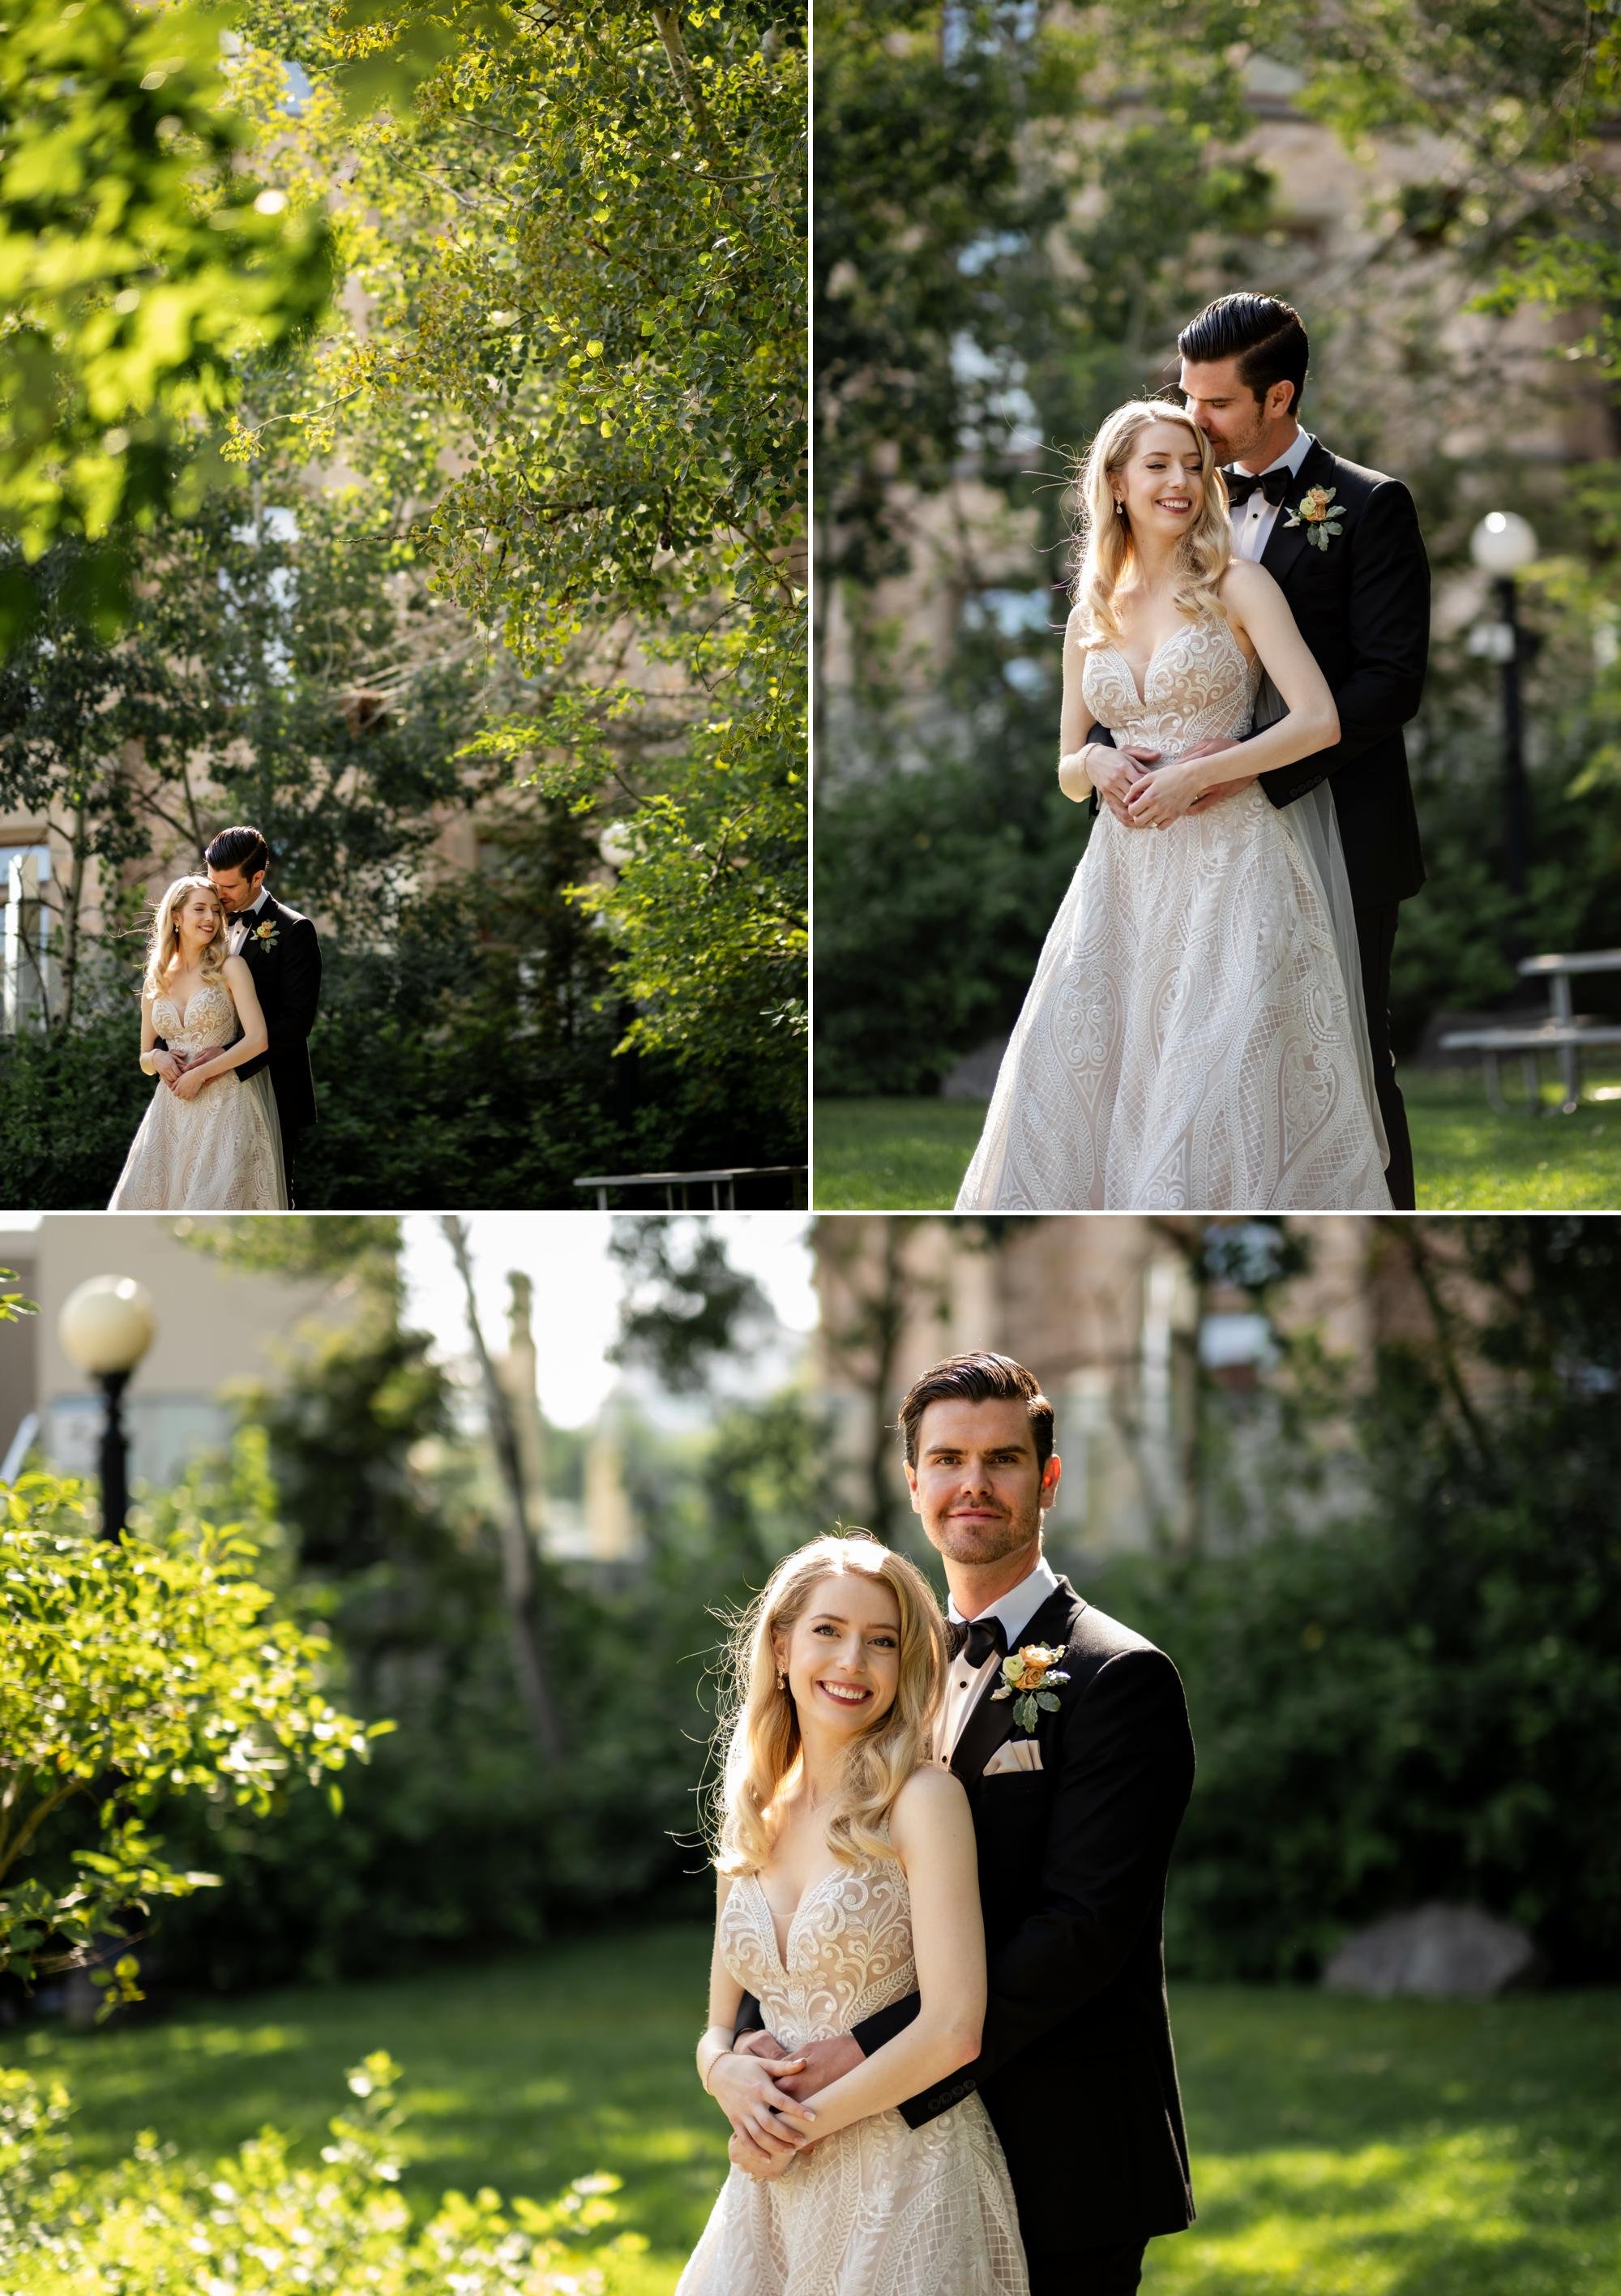 outdoor couples shots at a museum of nature wedding